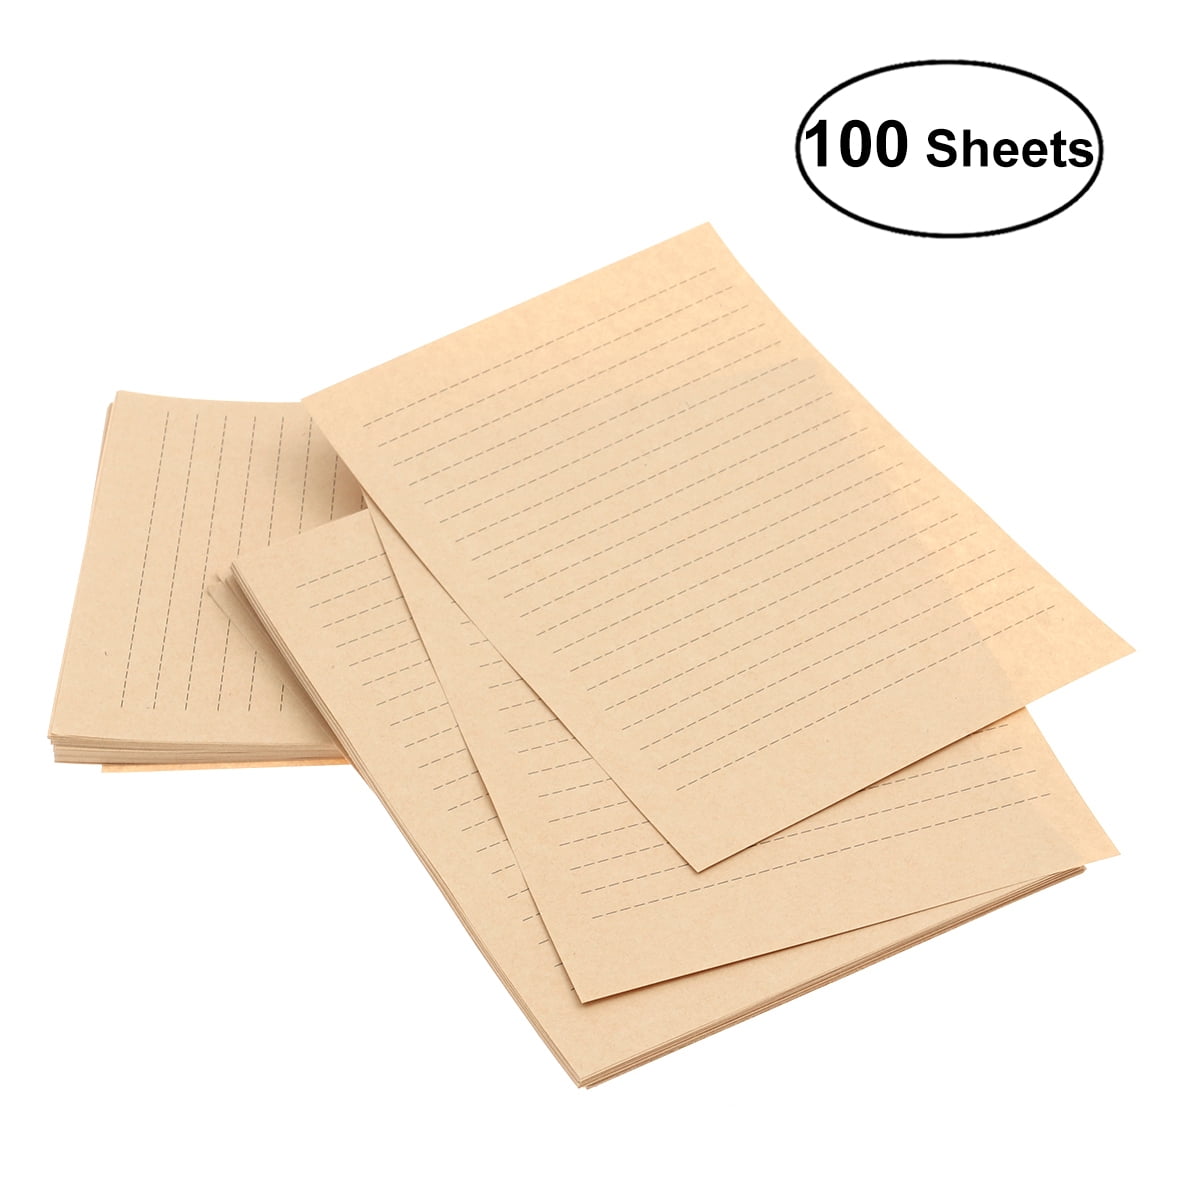 12x12 Album for Scrapbooking Hardcover, Kraft Paper Material Spiral Bound  Sketchbook for Drawing, Writing, Arts and Crafts Projects, Home, Office,  School (40 Sheets Total) 